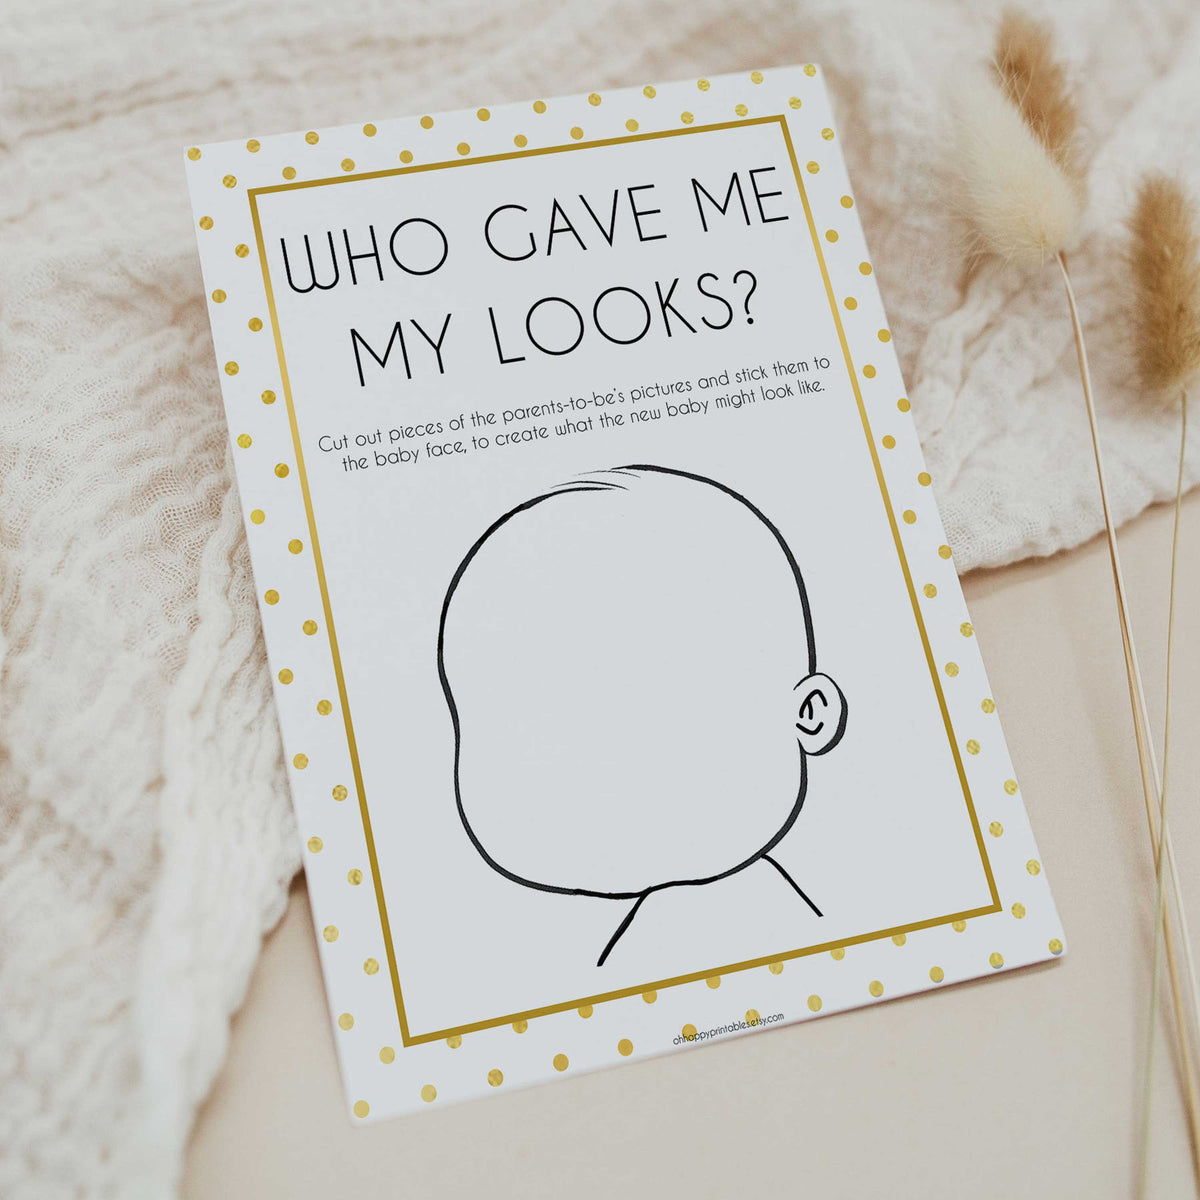 who gave me my looks, baby looks game, Printable baby shower games, baby gold dots fun baby games, baby shower games, fun baby shower ideas, top baby shower ideas, gold glitter shower baby shower, friends baby shower ideas